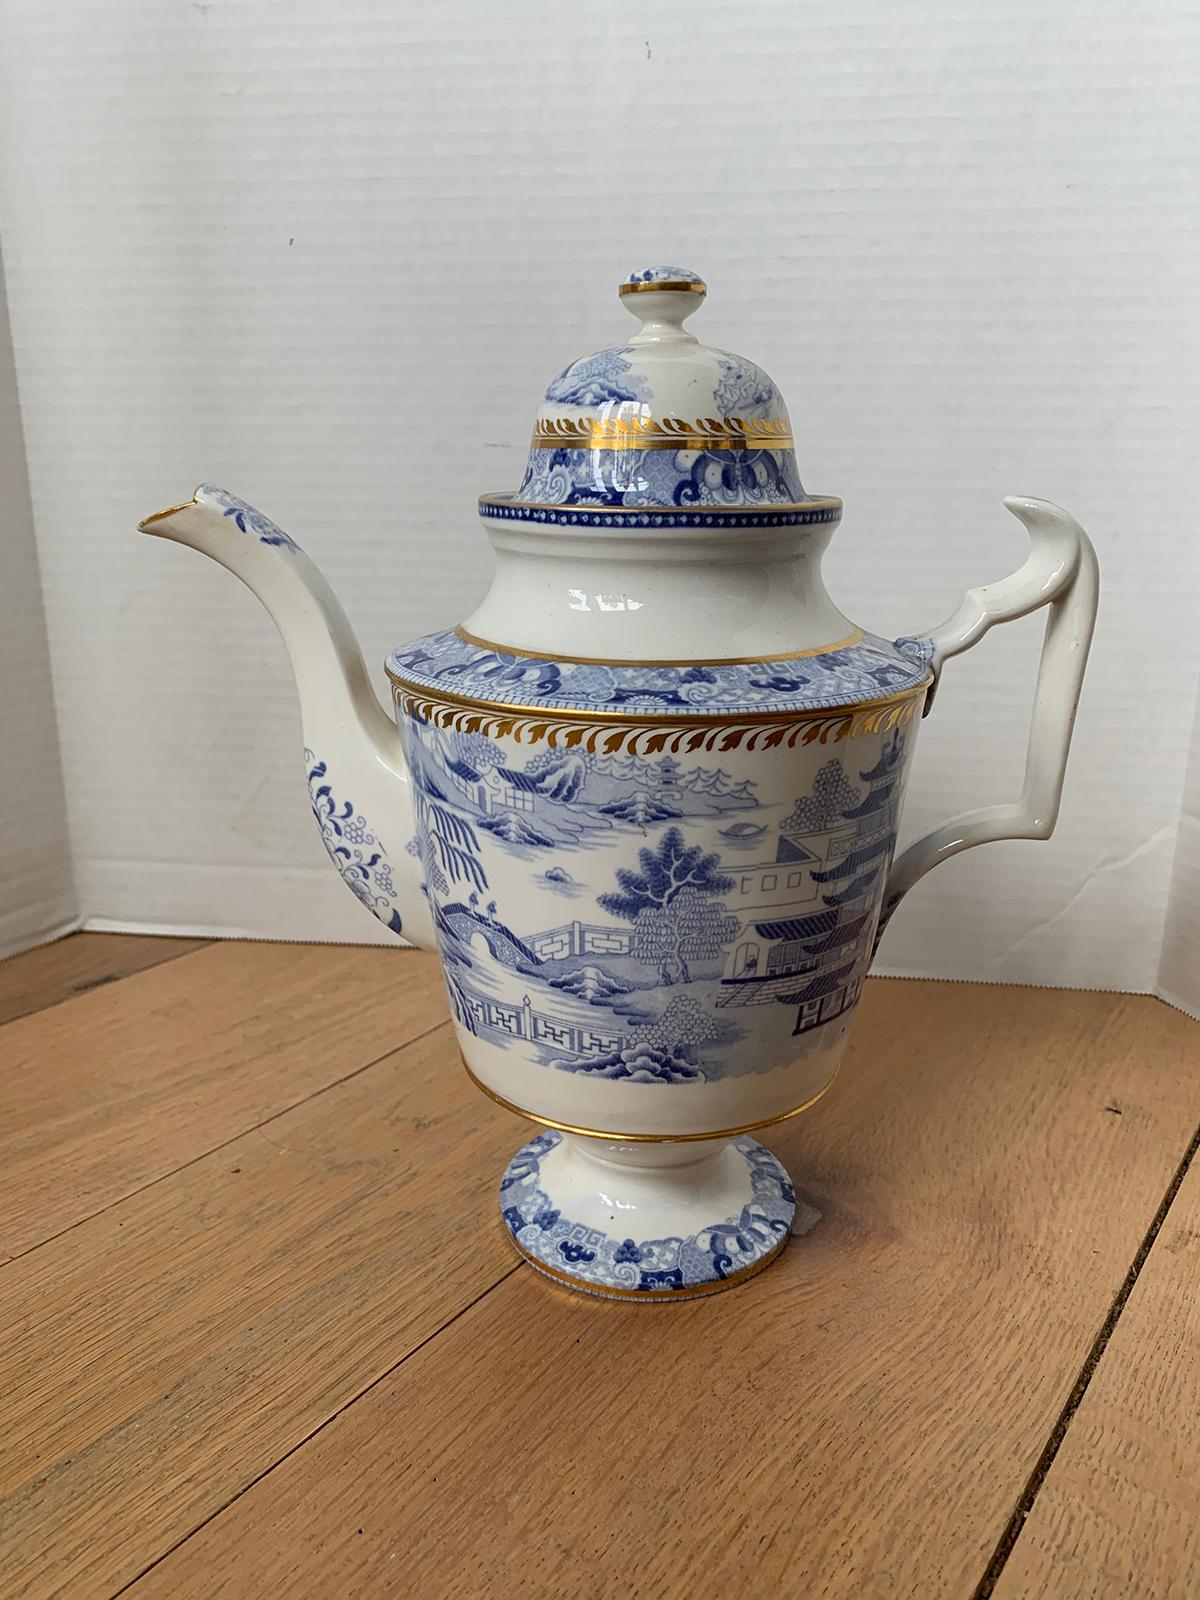 18th-19th century English Coalport blue and white porcelain teapot with gilt details and lid, unmarked.